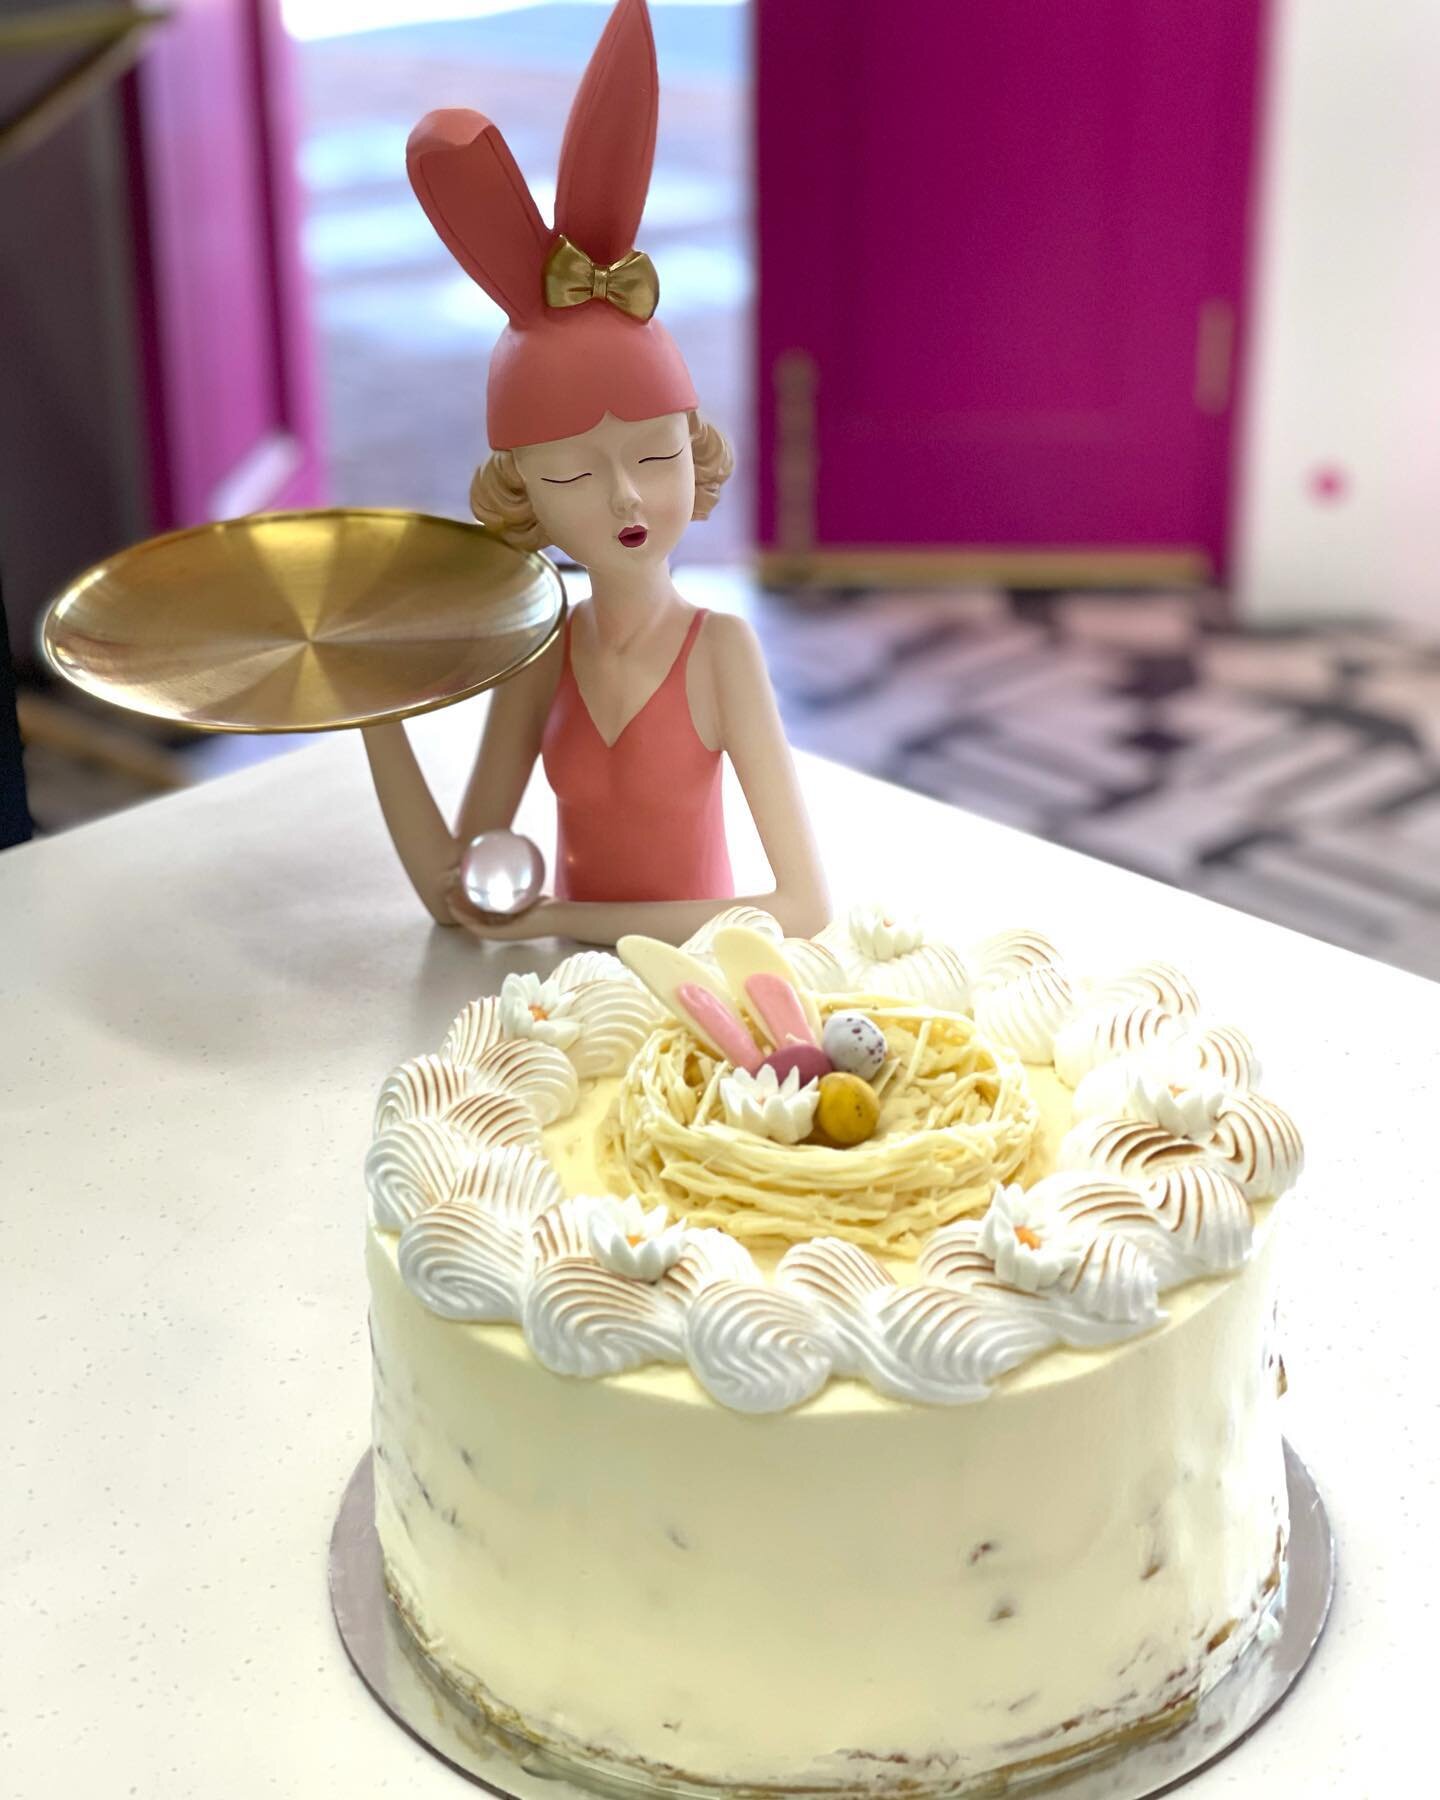 THE EASTER BUNNY will be drawing our competition winner this evening when her delayed flight from Melbourne arrives so you have a few more hours to enter! Orders for our Easter Lemon Meringue Crepe Cake and Easter Cupcake and DIY Easter Bunny House K